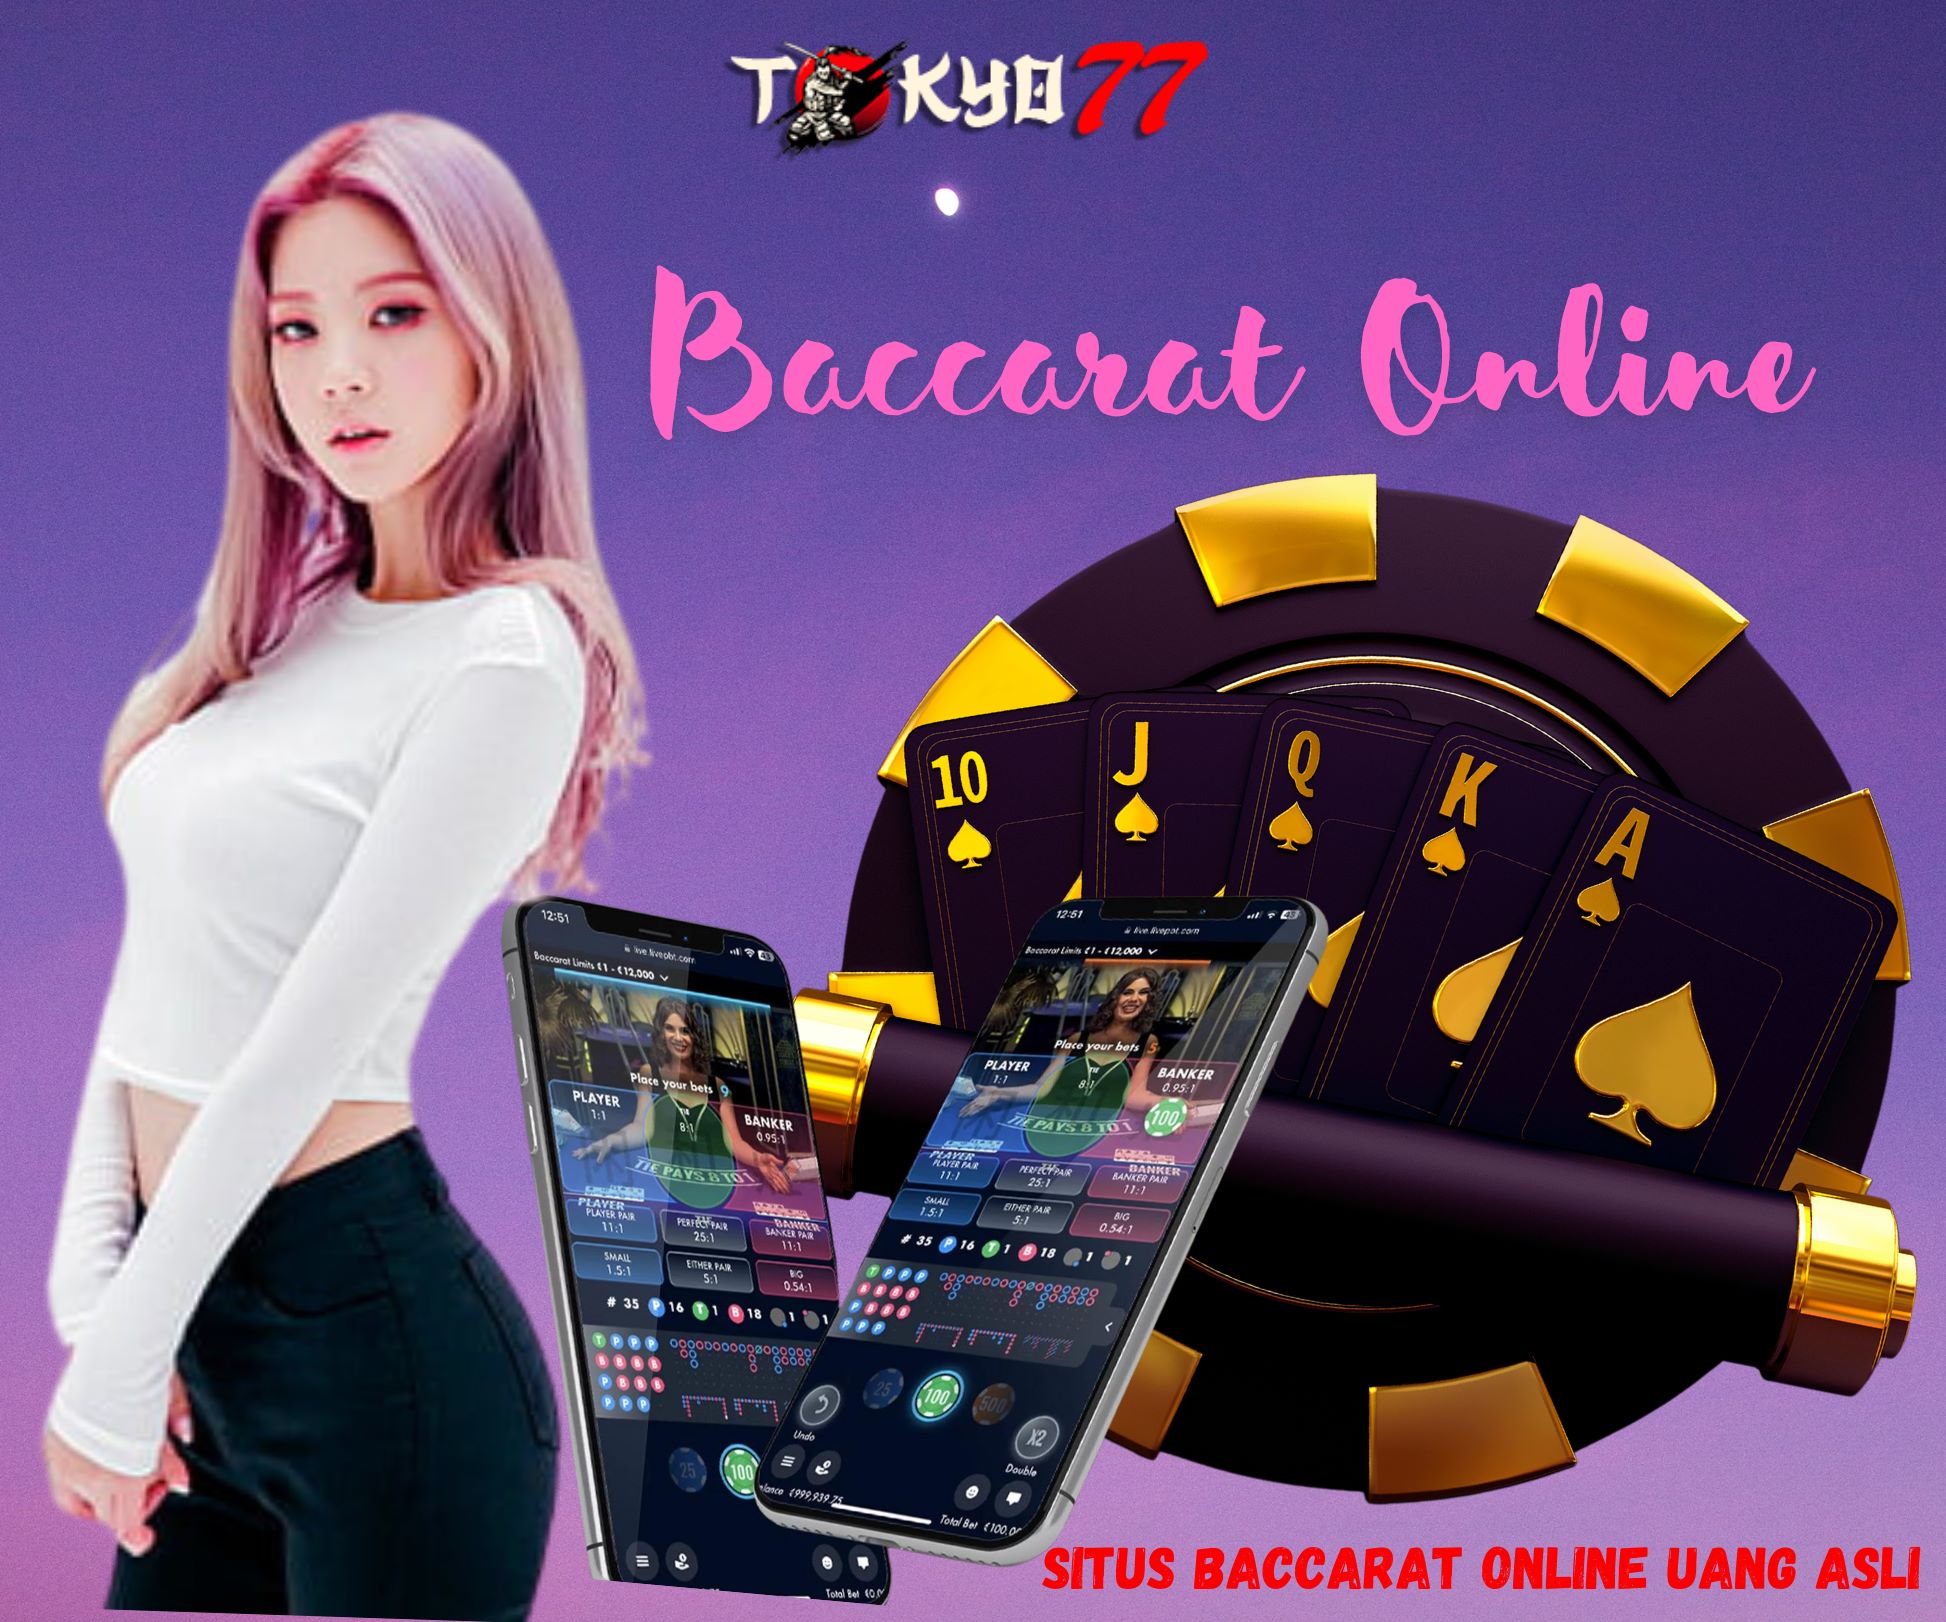 Some Important Tips for Playing Baccarat